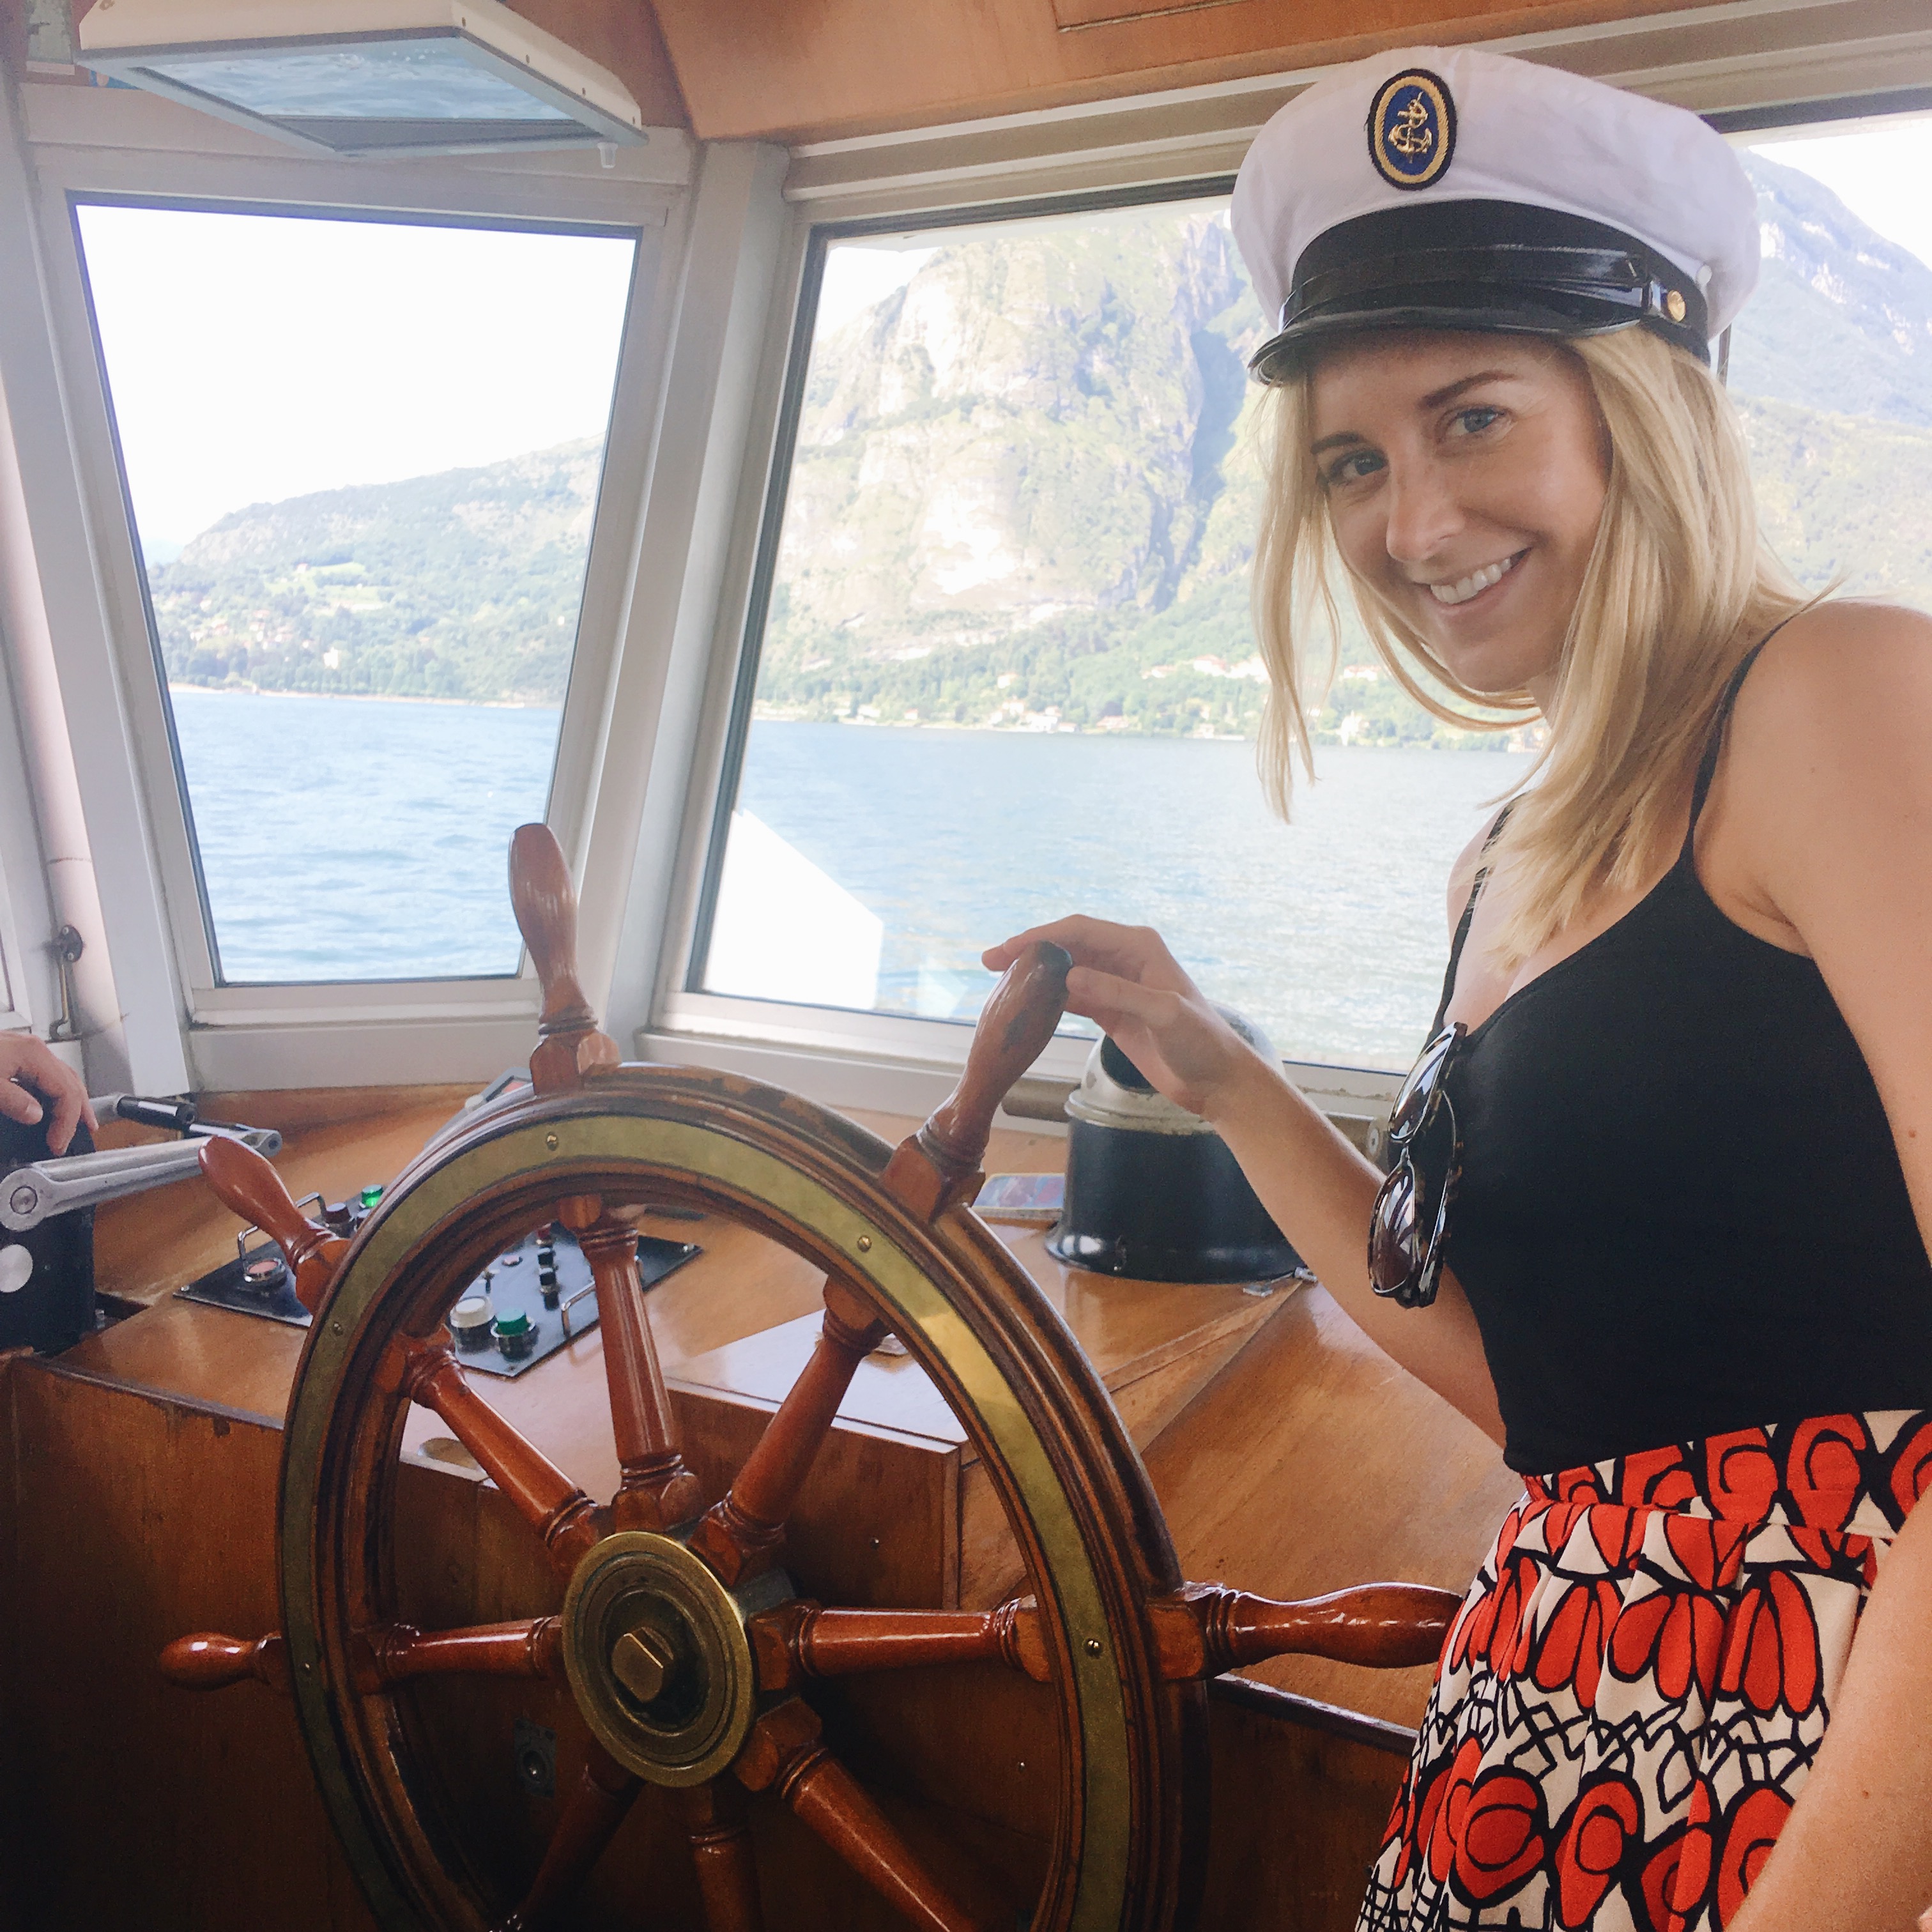 Getting a picture at the helm